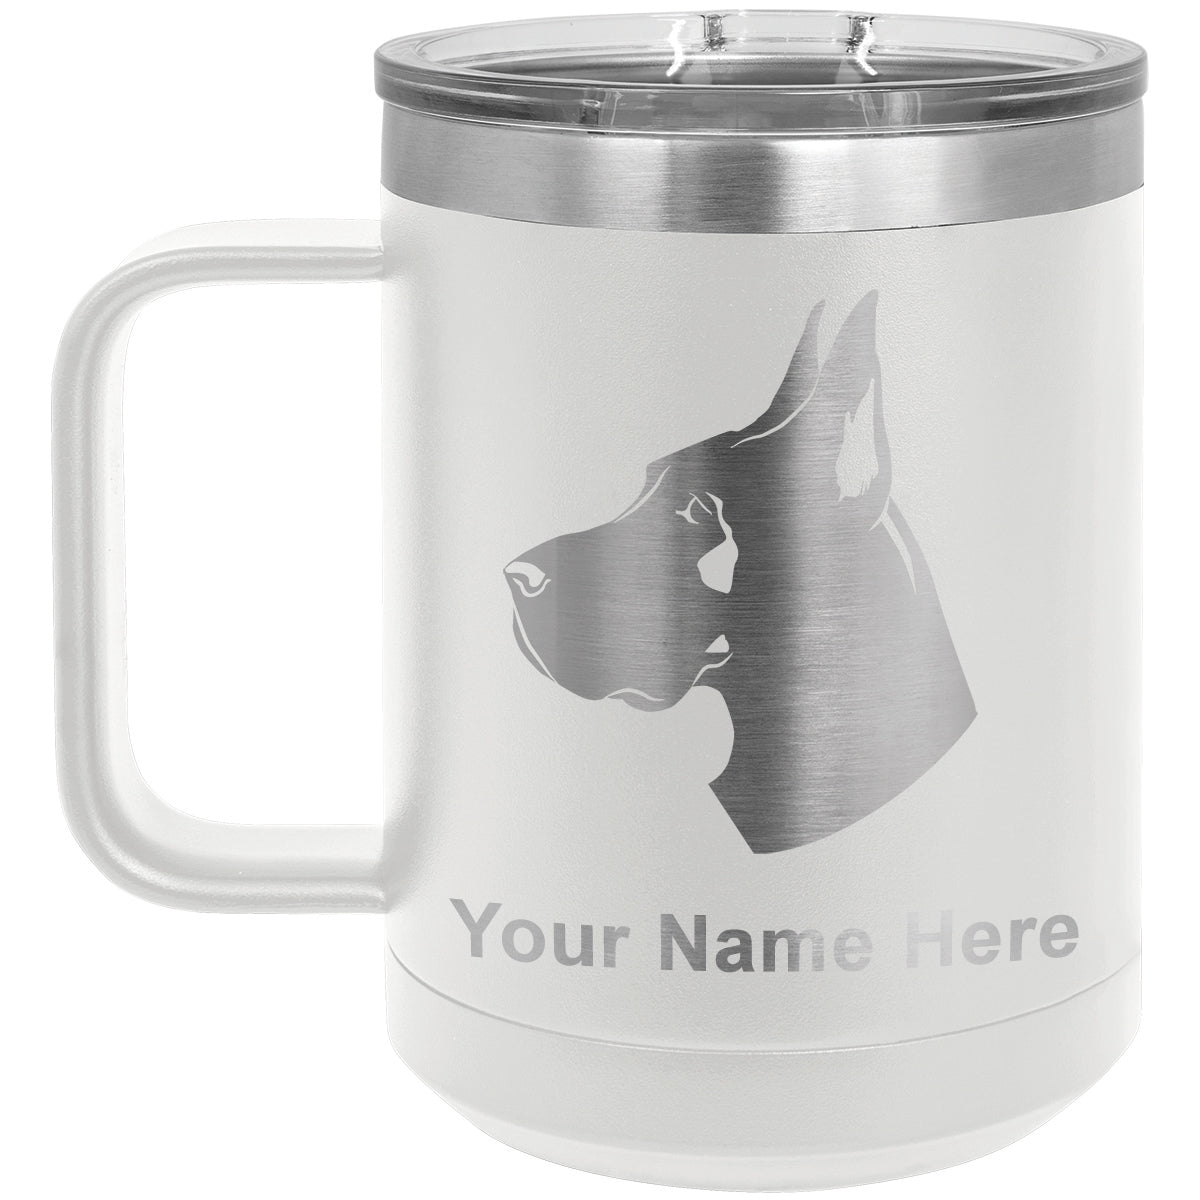 15oz Vacuum Insulated Coffee Mug, Great Dane Dog, Personalized Engraving Included